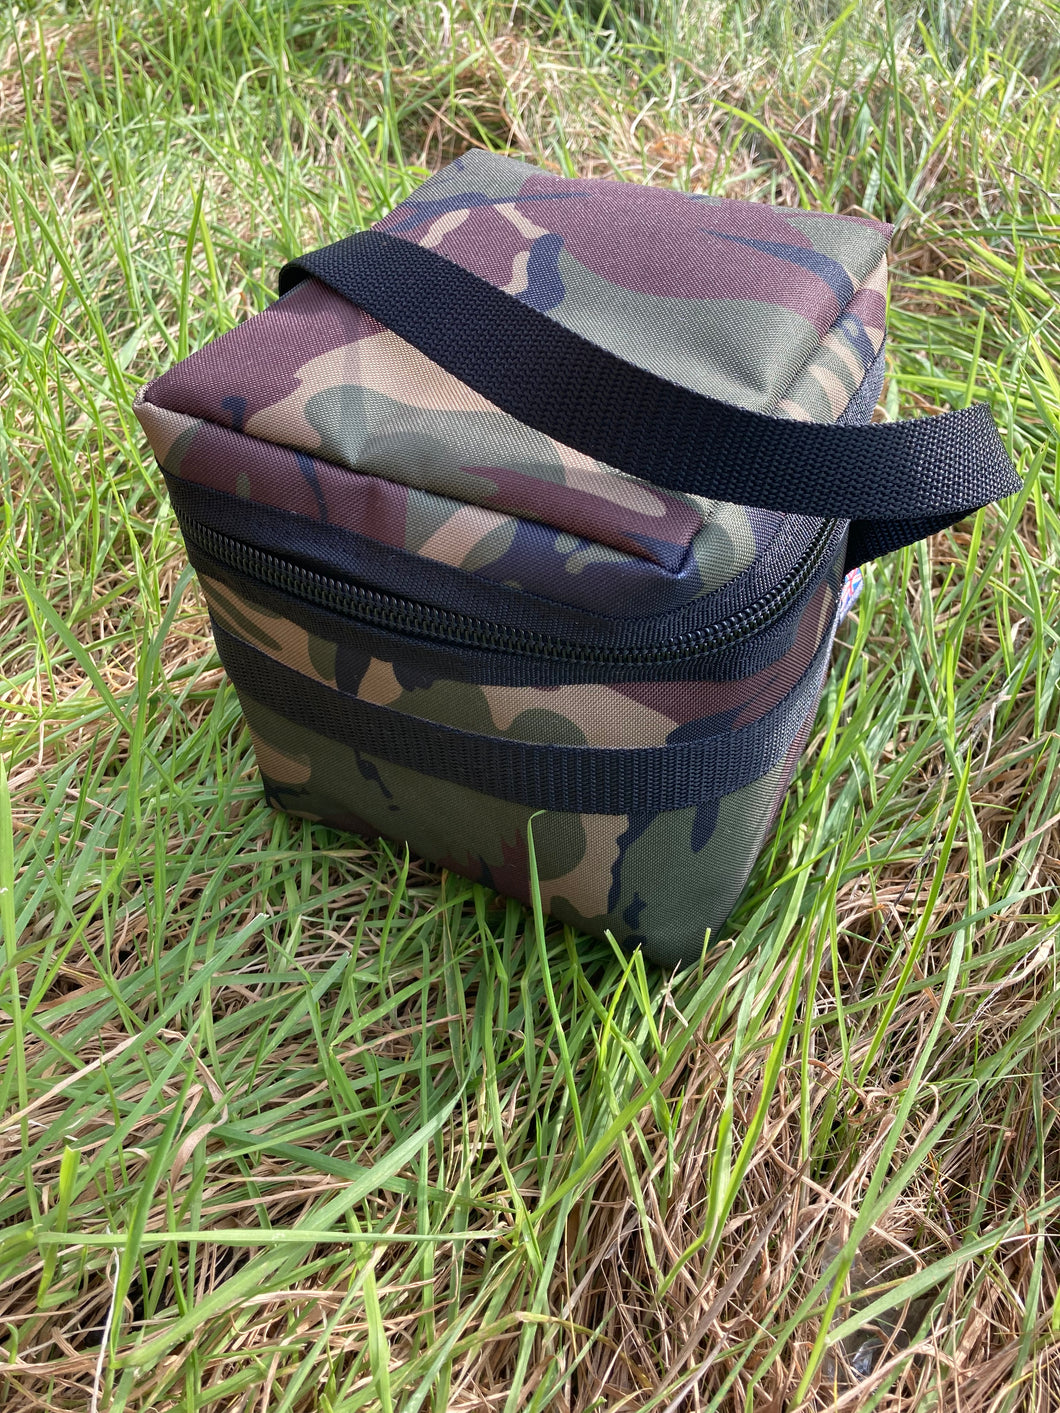 Midwater Bait Bags.  Fishing POP UPS, WAFTERS bait tub carriers.